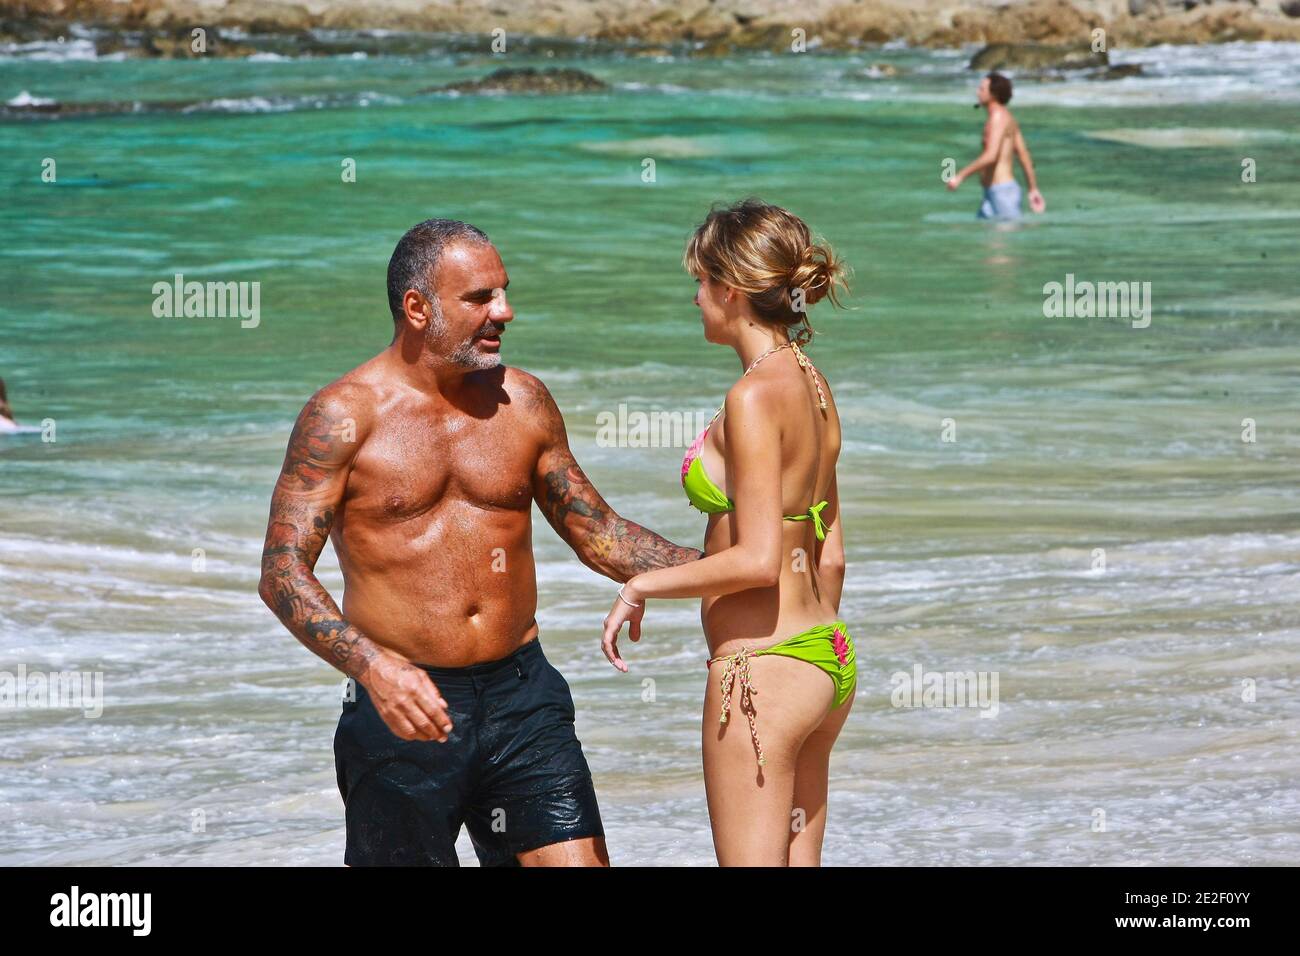 EXCLUSIVE - Christian Audigier and Nathalie Sorensen on a Surin beach in  Phuket, Thailand on December 29, 2011. Photo by Christian  Mouchet/ABACAPRESS.COM Stock Photo - Alamy